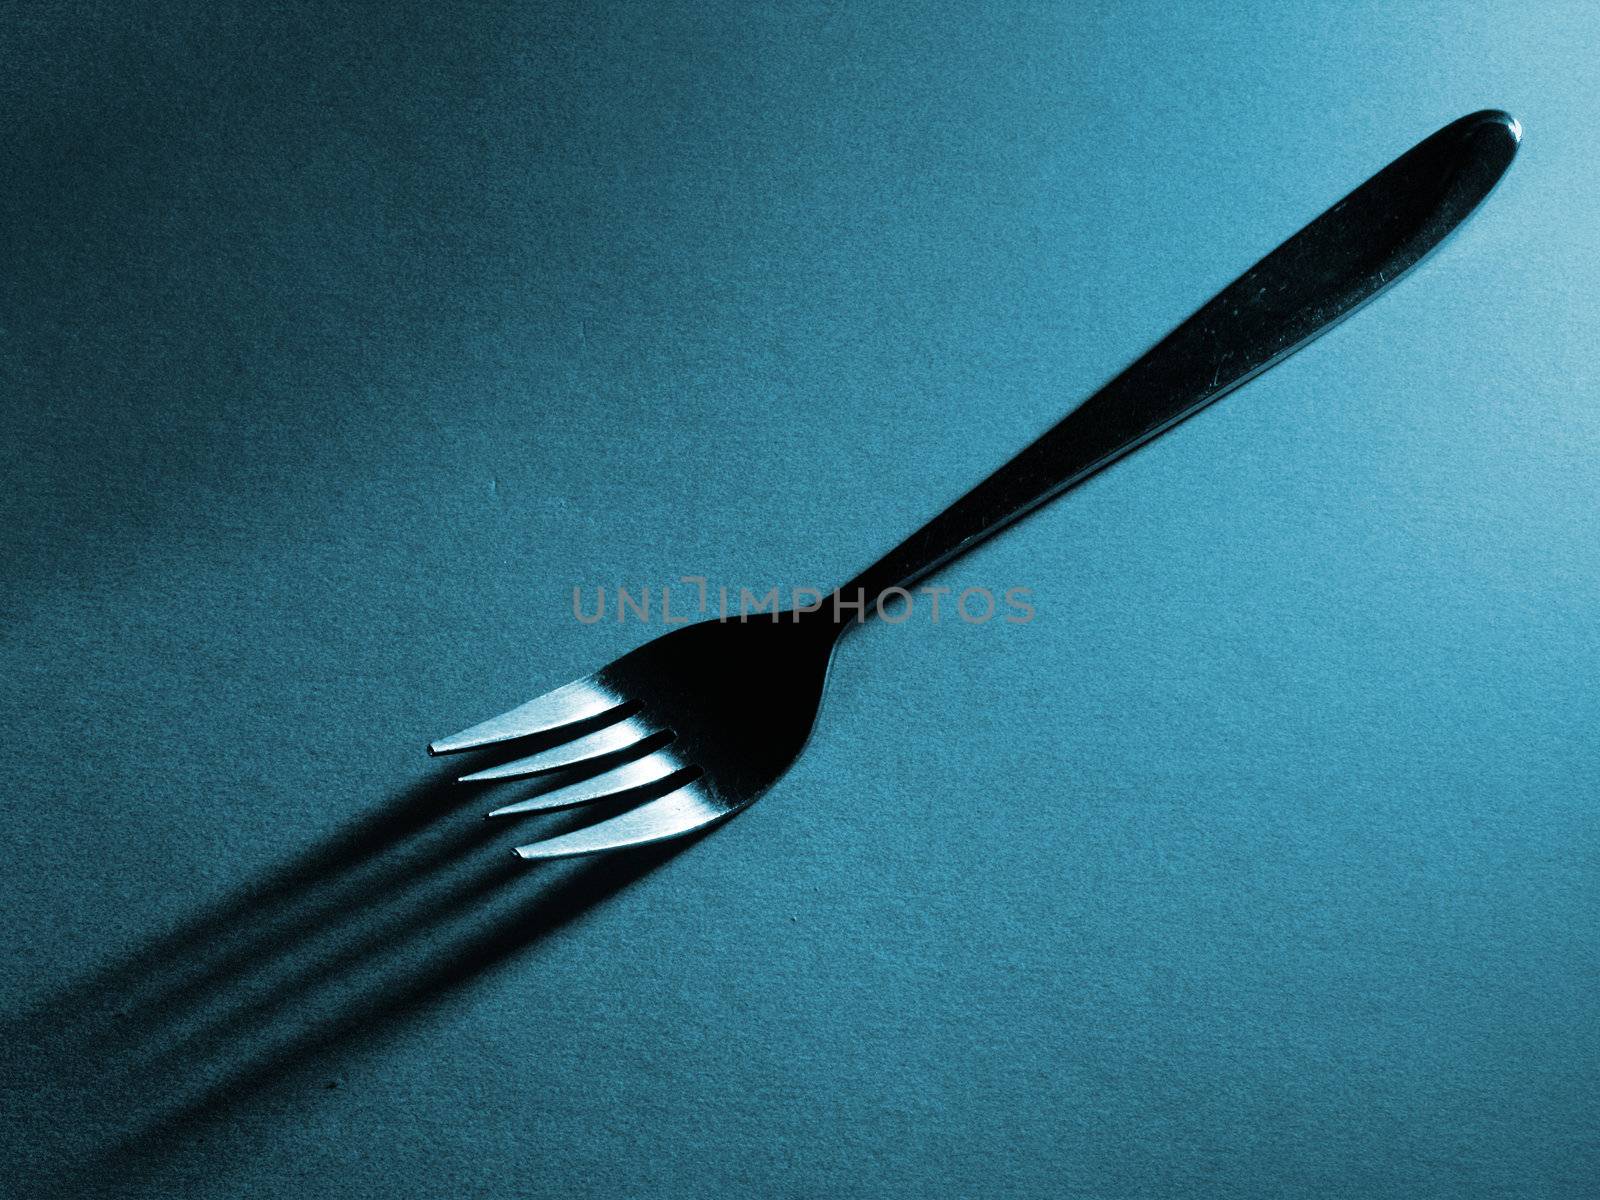 Diagonal fork and shadow against a a textured surface